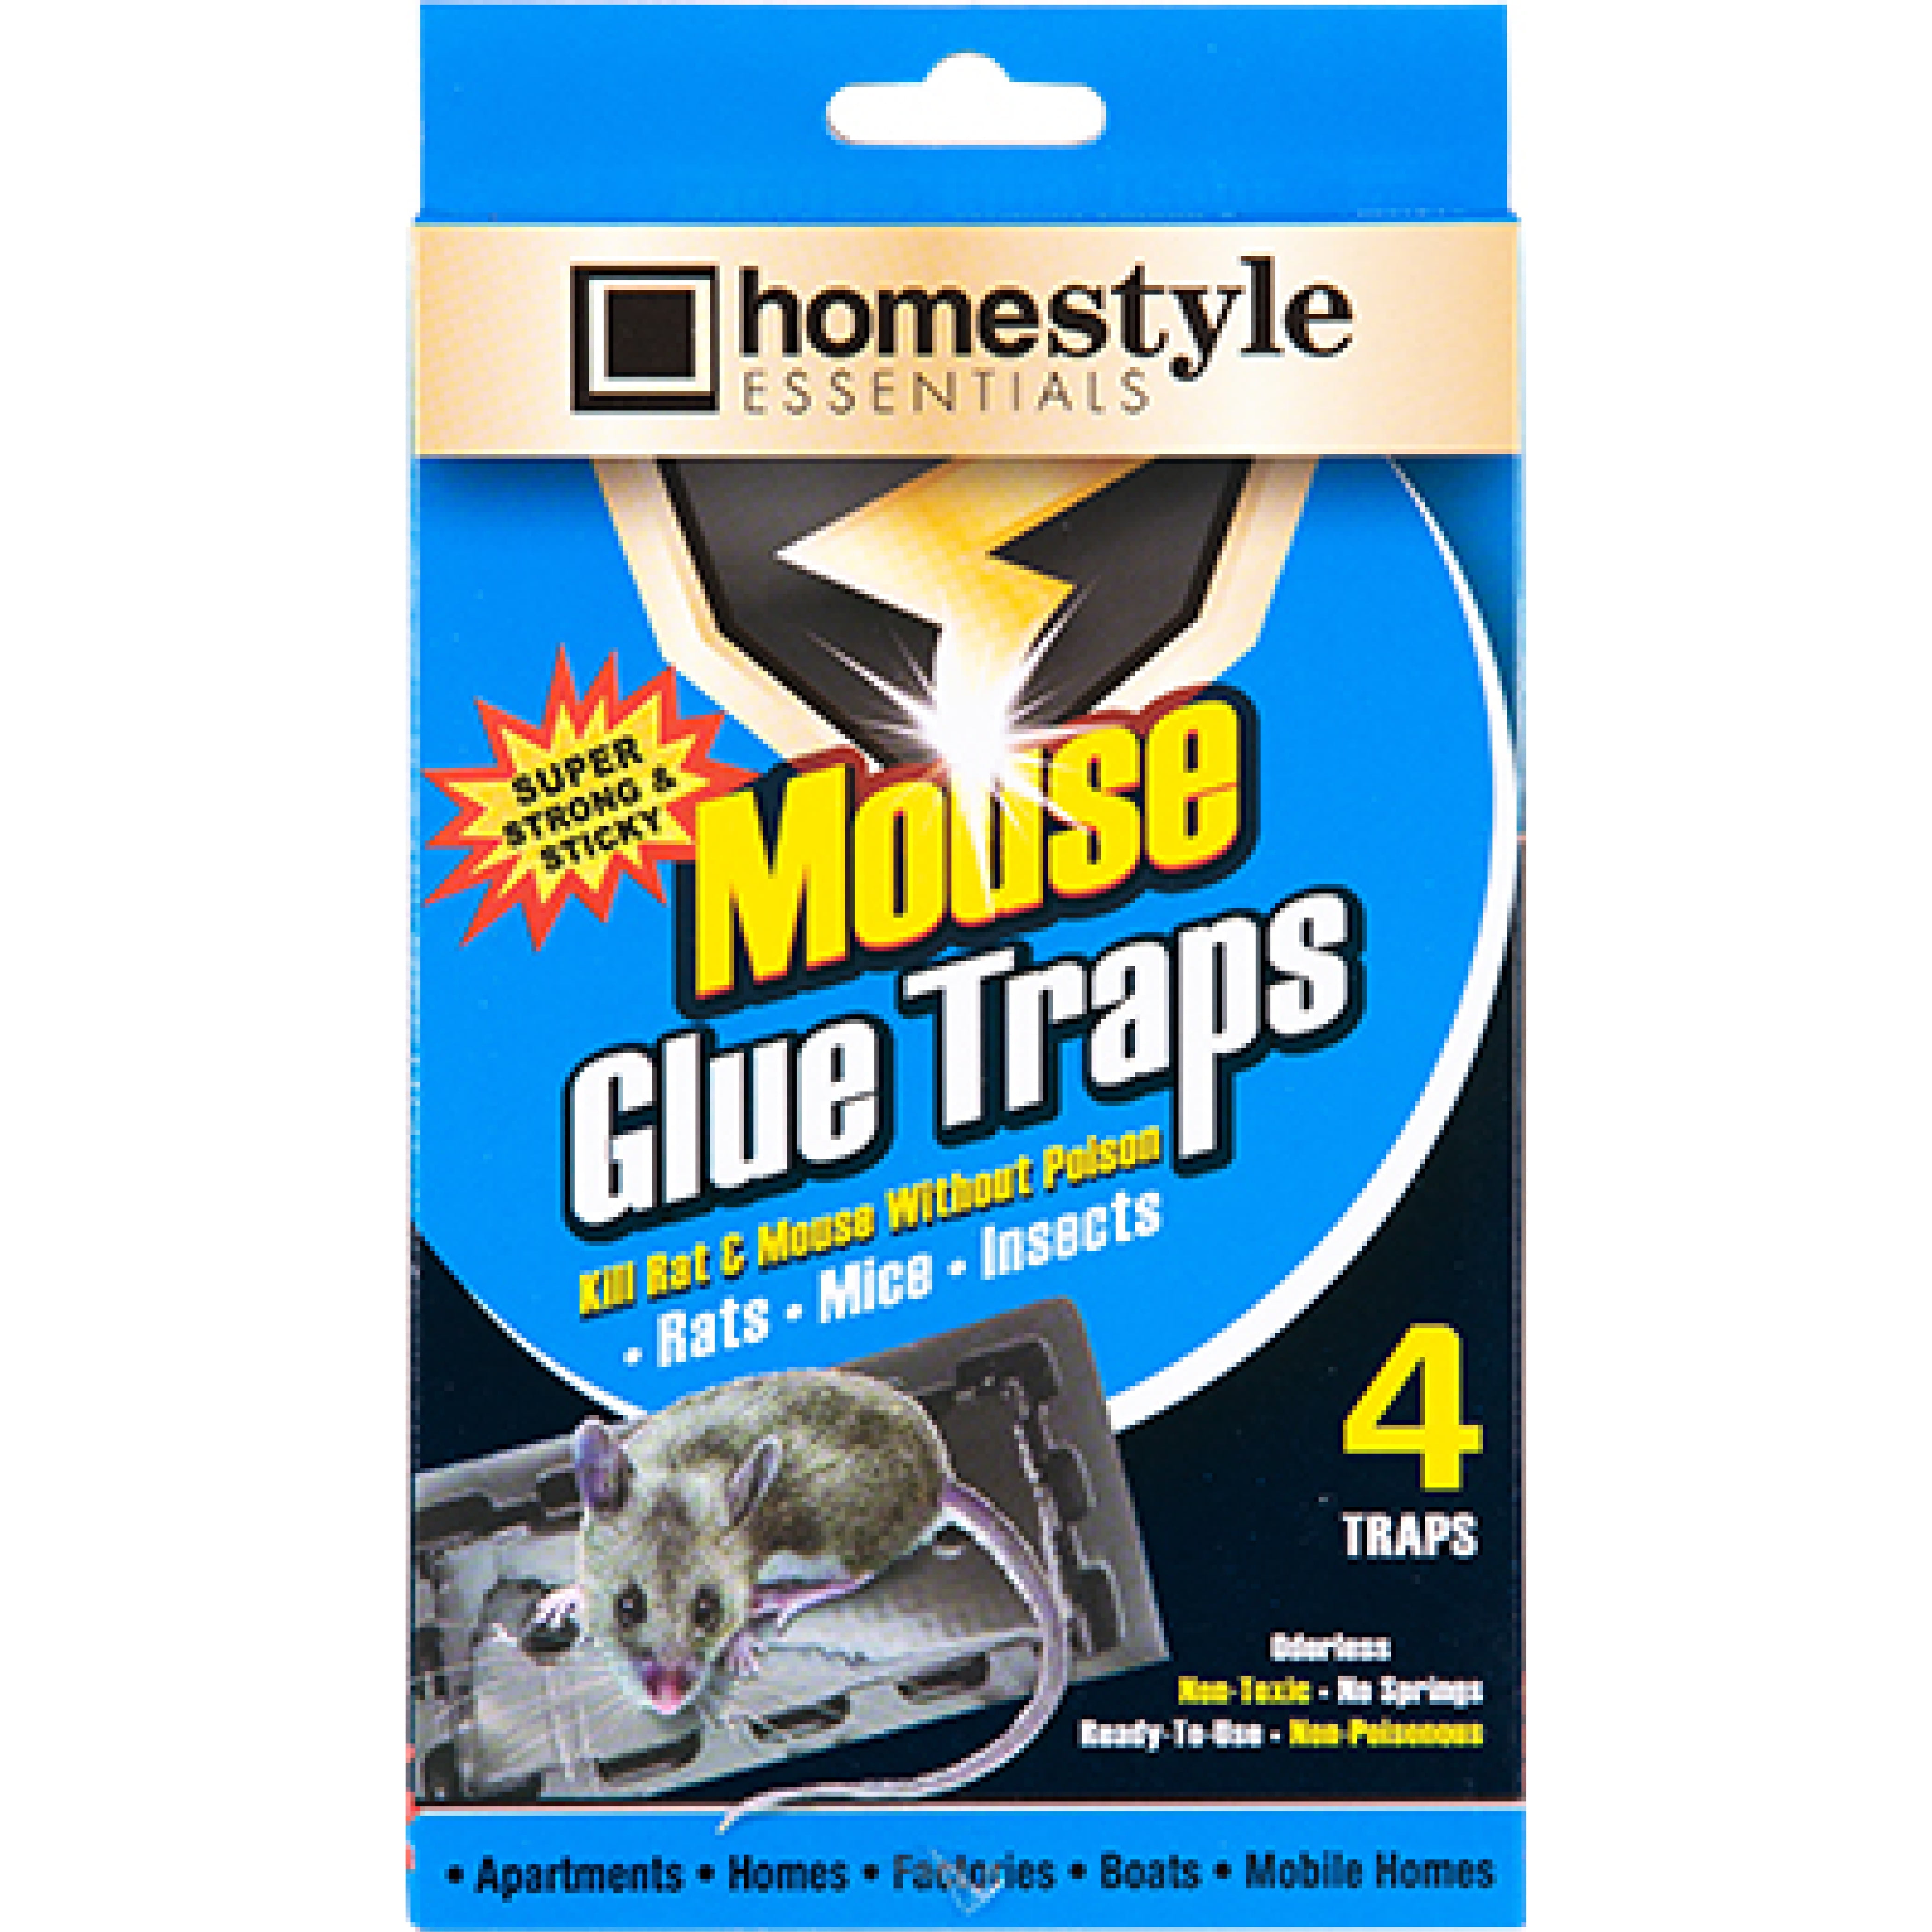 Shop Super Strong Sticky Mouse with great discounts and prices